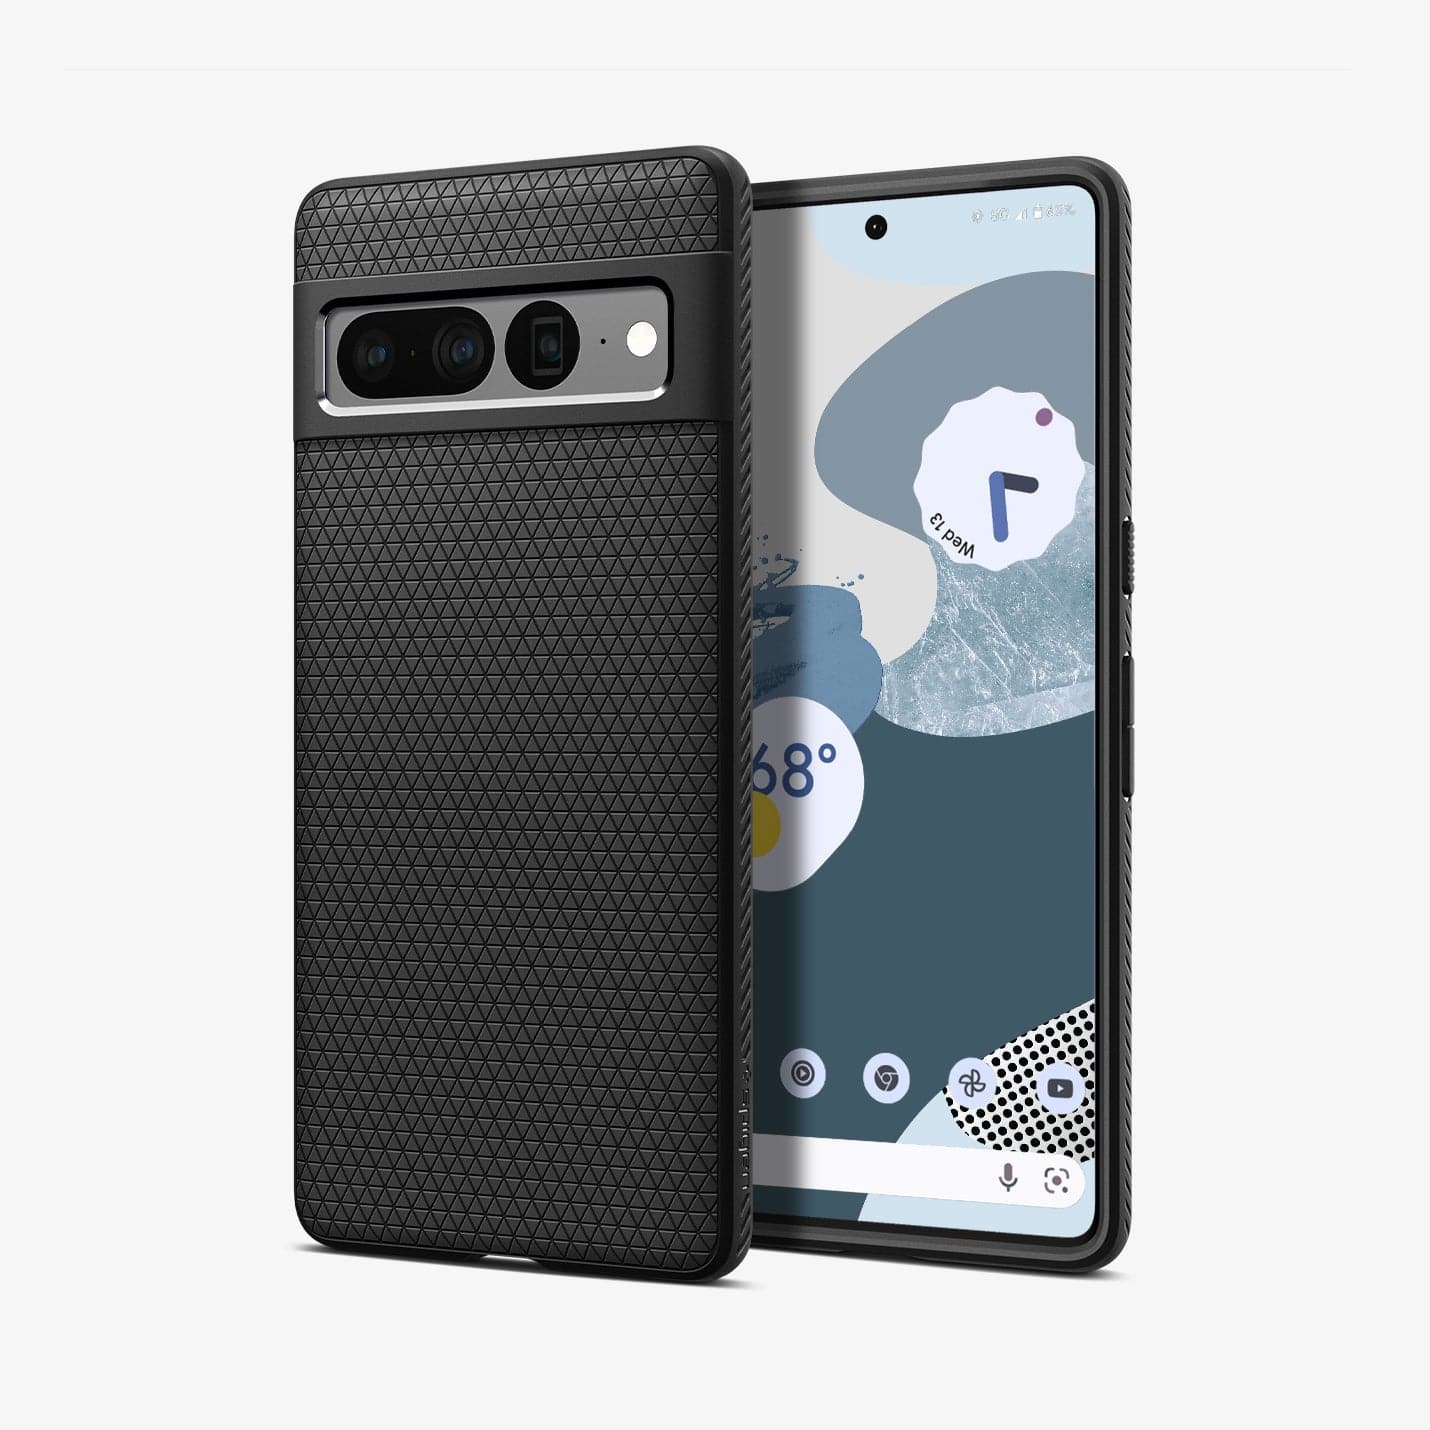 ACS04723 - Pixel 7 Pro Case Liquid Air in matte black showing the back and front